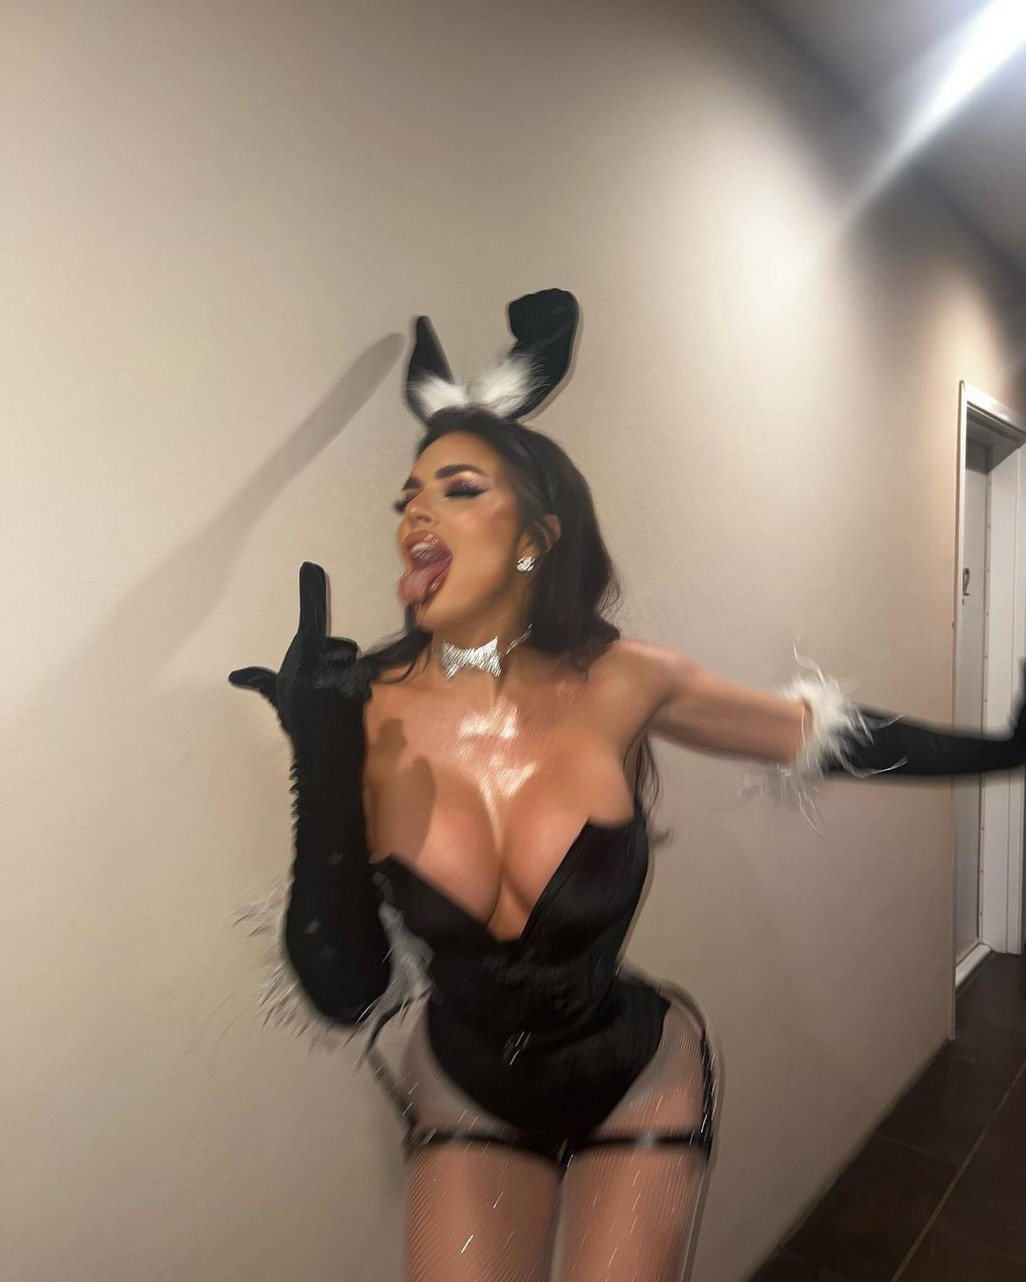 Kelsie Jean Smeby Sexy Halloween TheFappening.Pro 6 - Kelsie Jean Smeby Hot For Halloween (9 Photos)